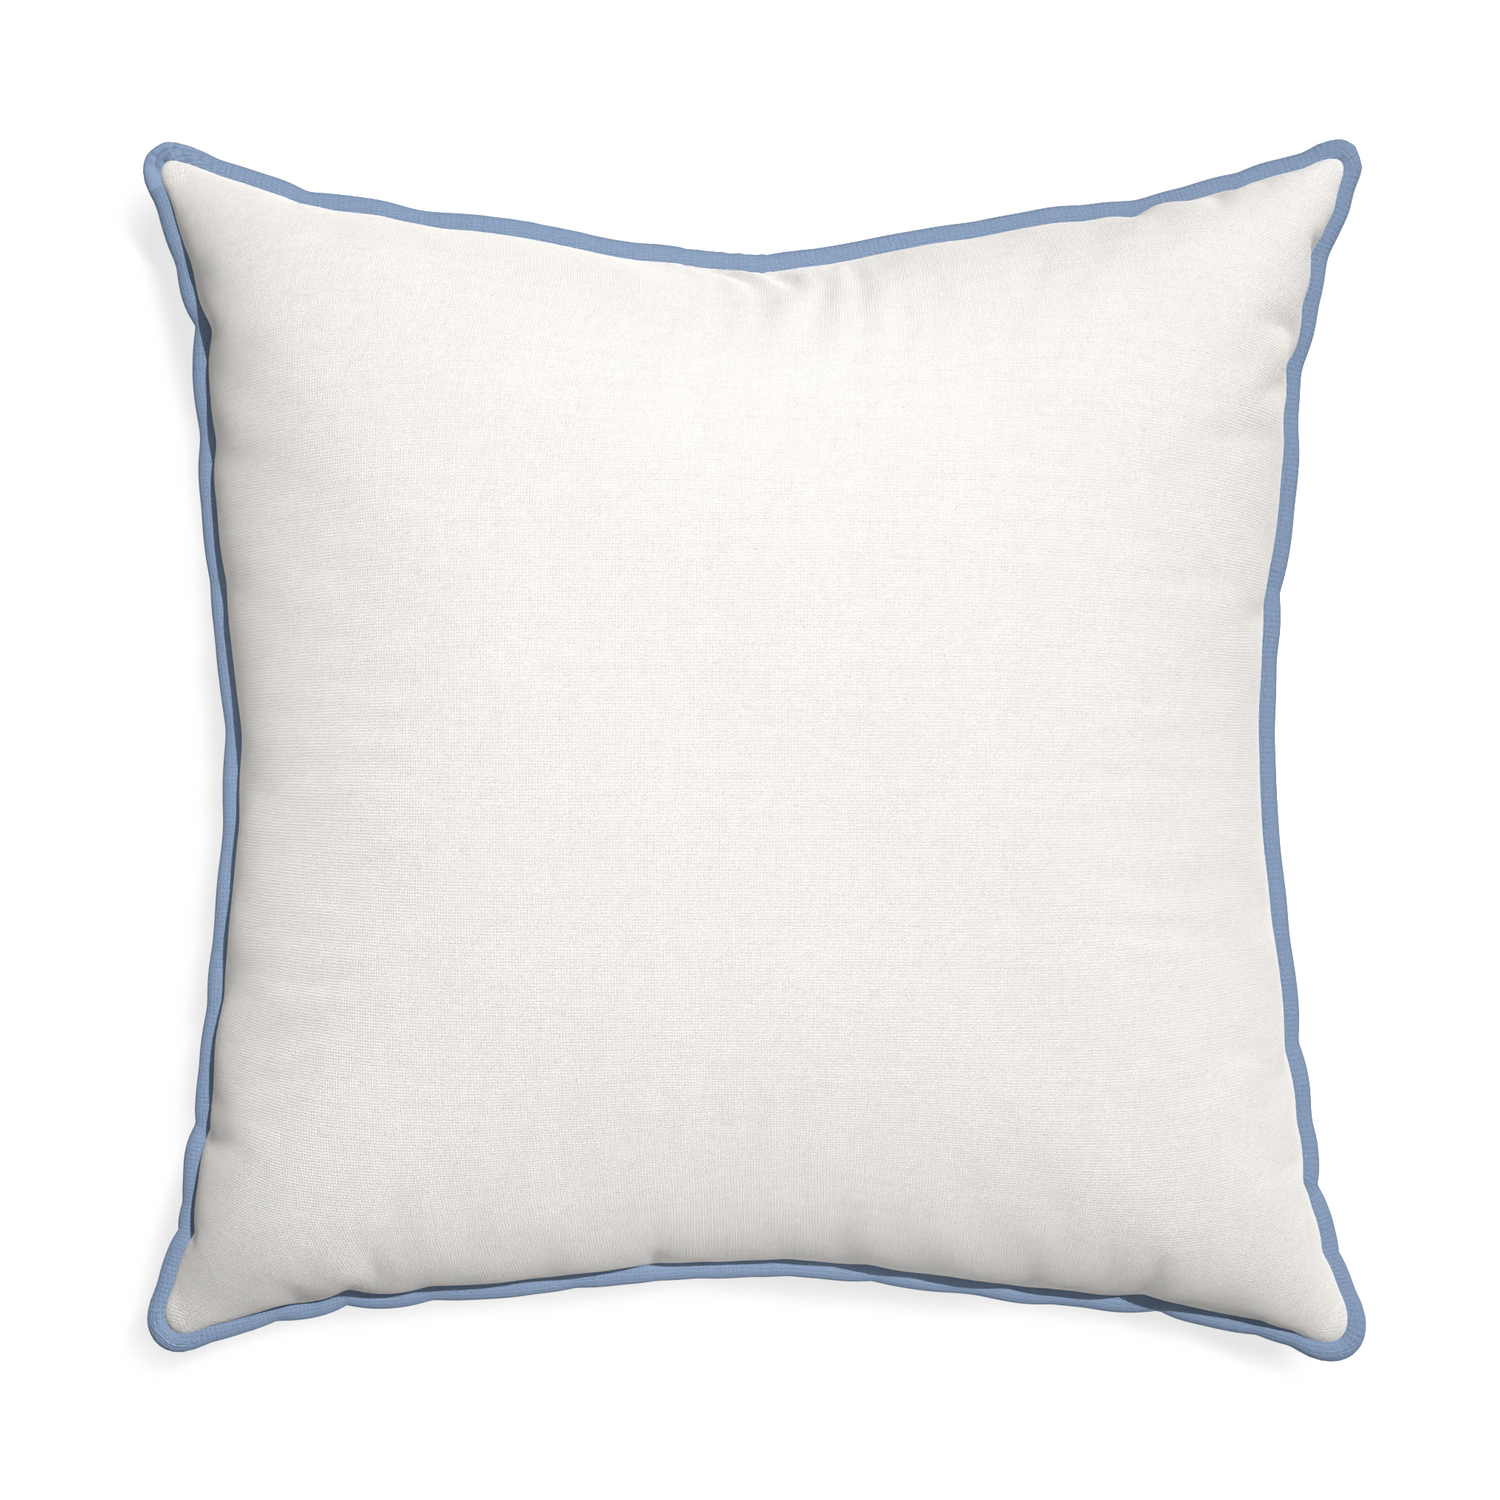 Euro-sham flour custom pillow with sky piping on white background